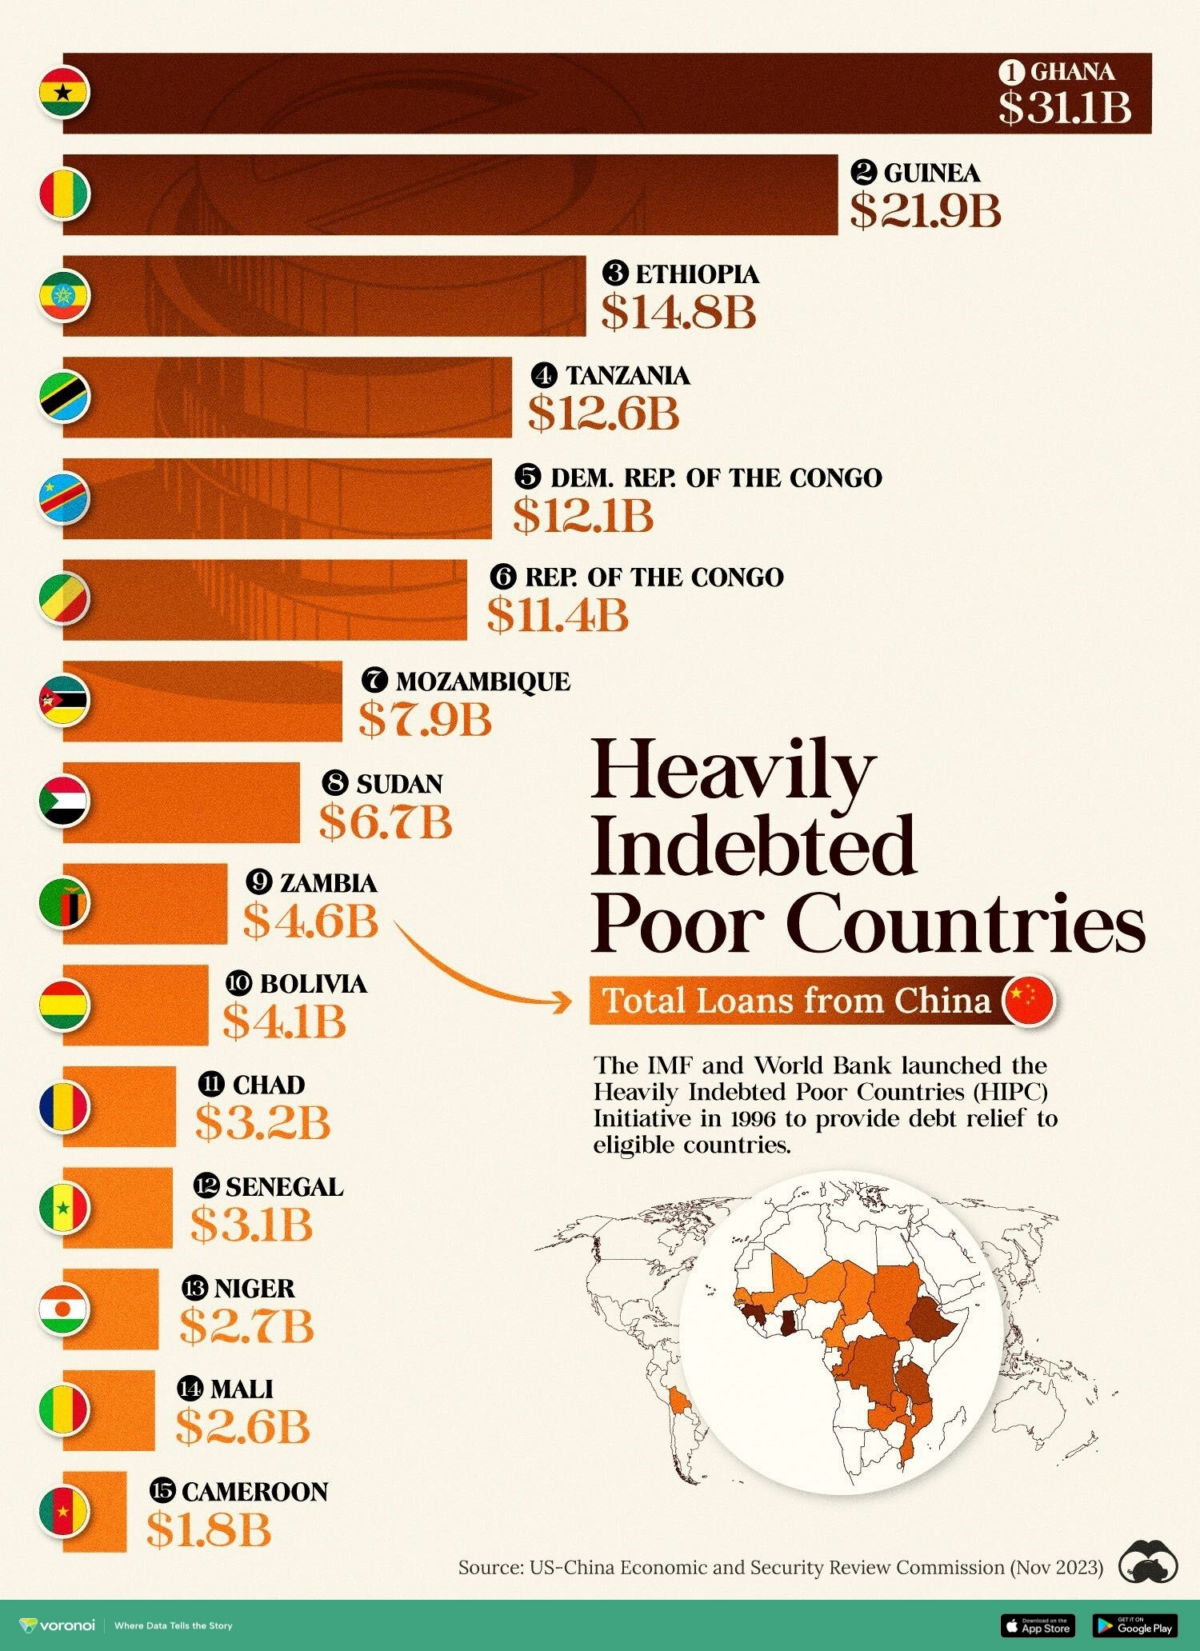 Poor Countries in Debt to China